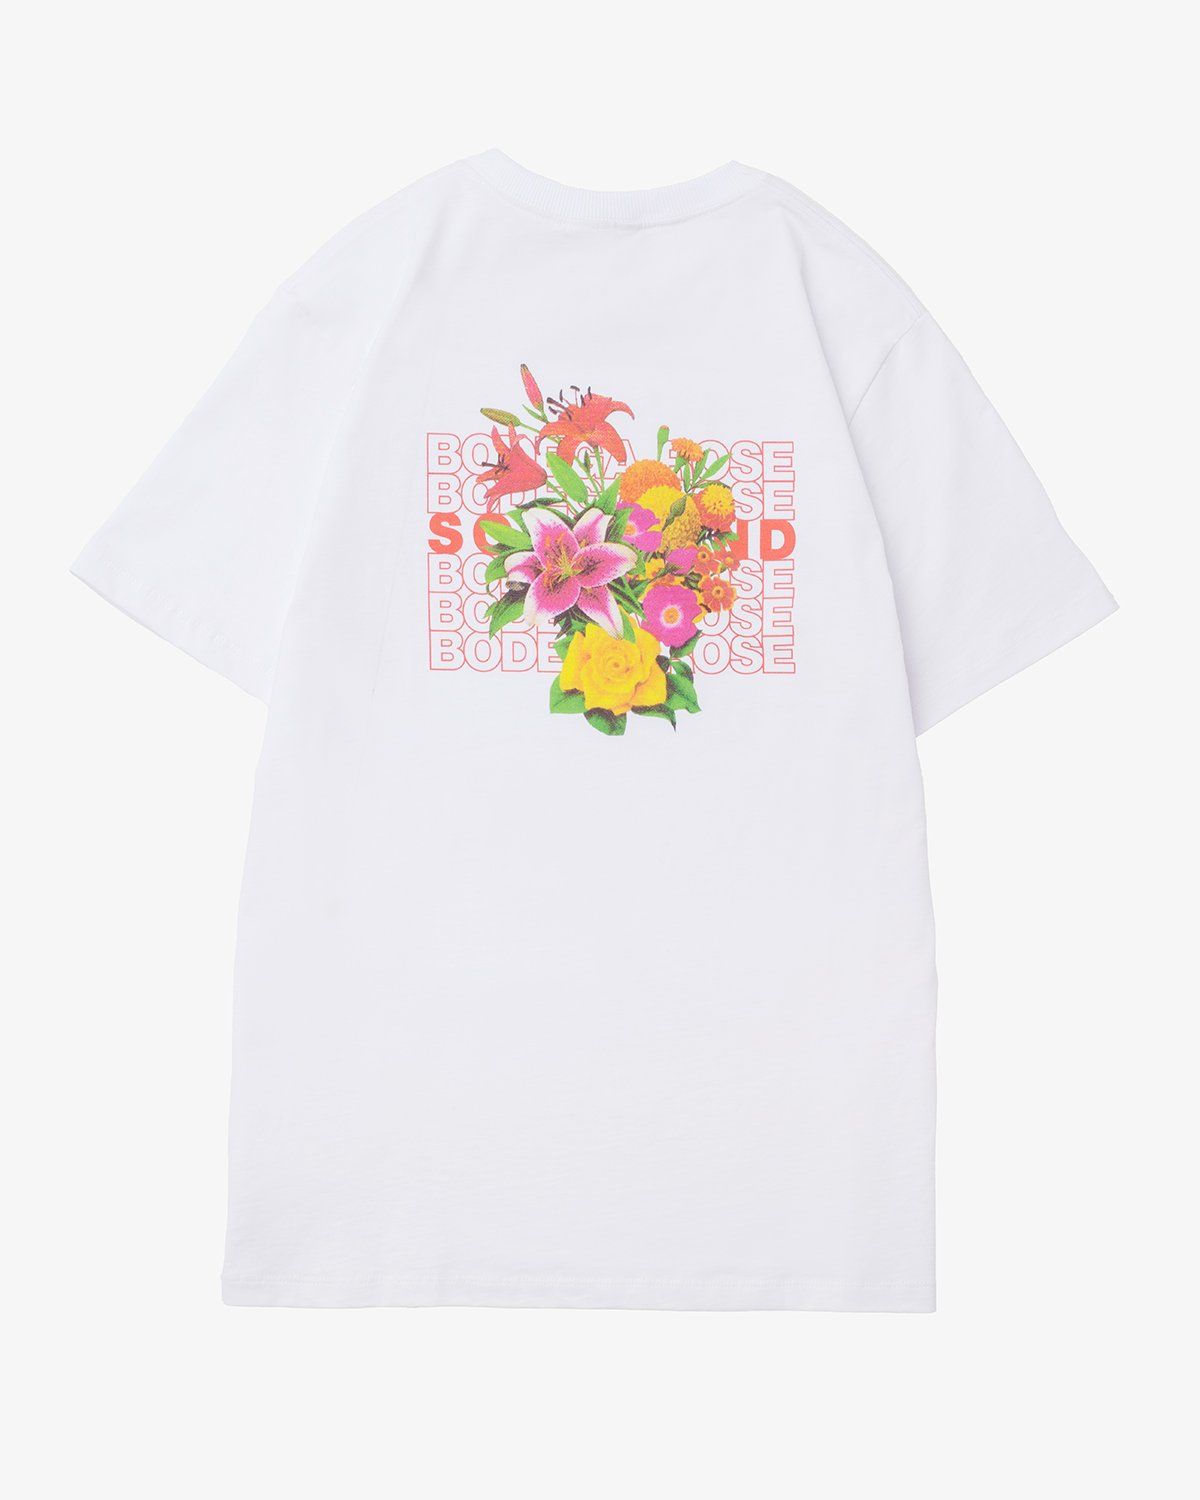 Soulland – Rossell S/S White - T-Shirts - White - Image 1